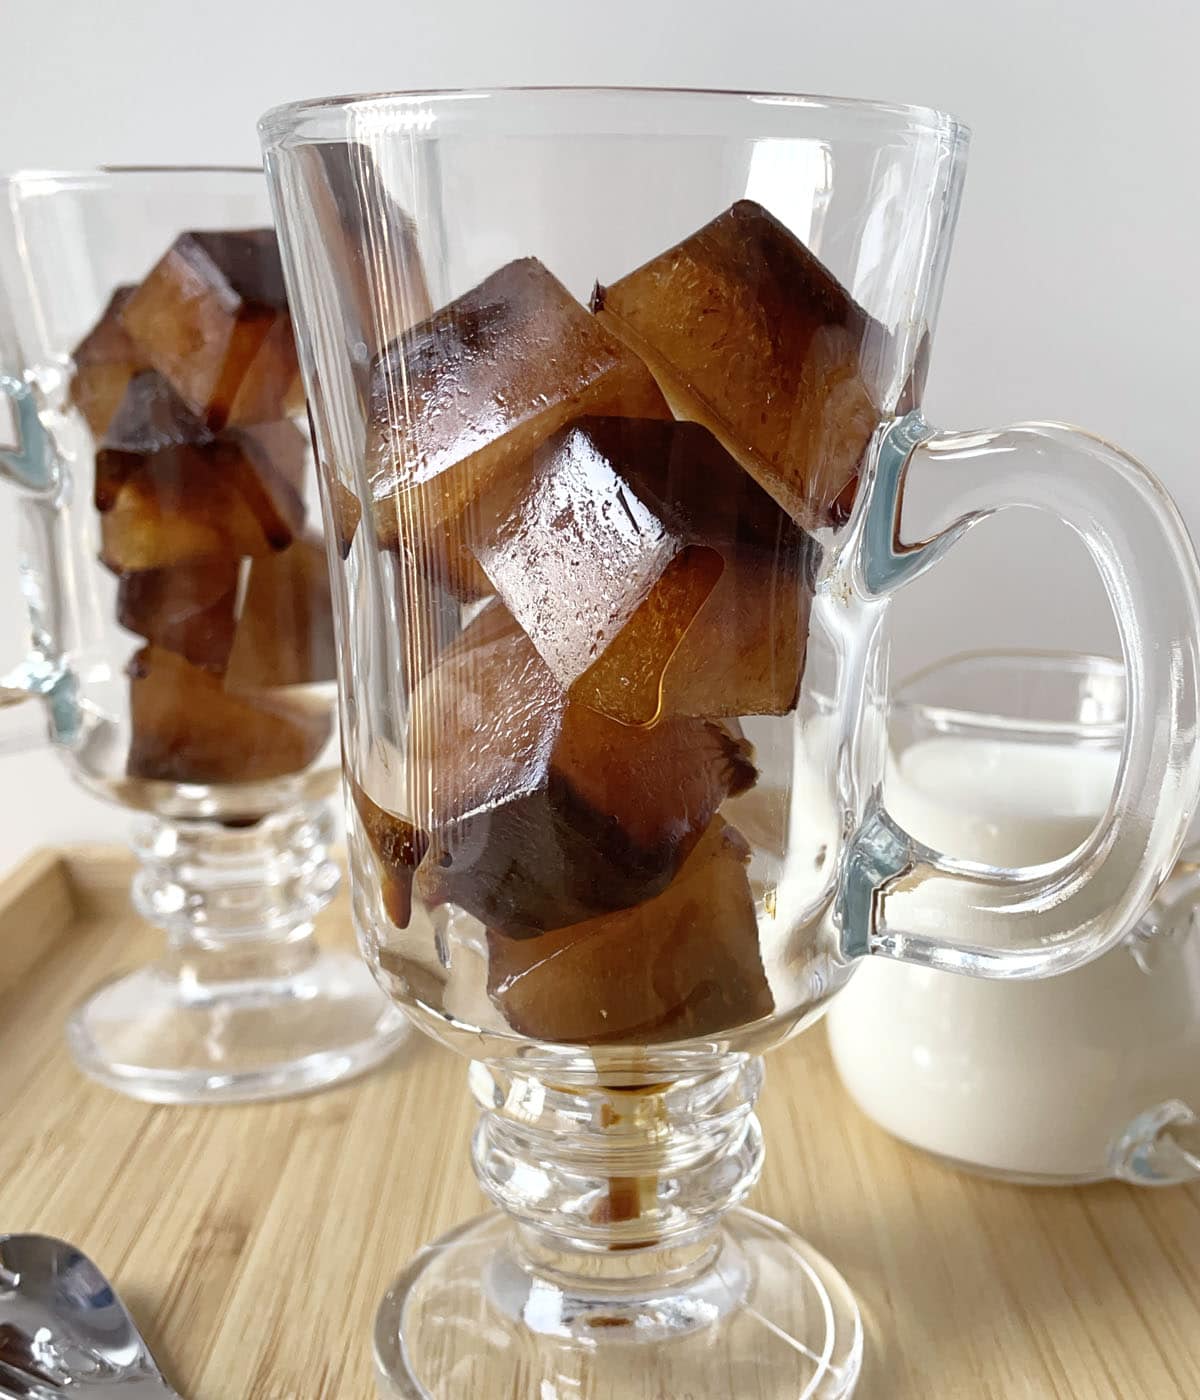 A small pitcher of milk next to two glass mugs containing coffee ice cubes.